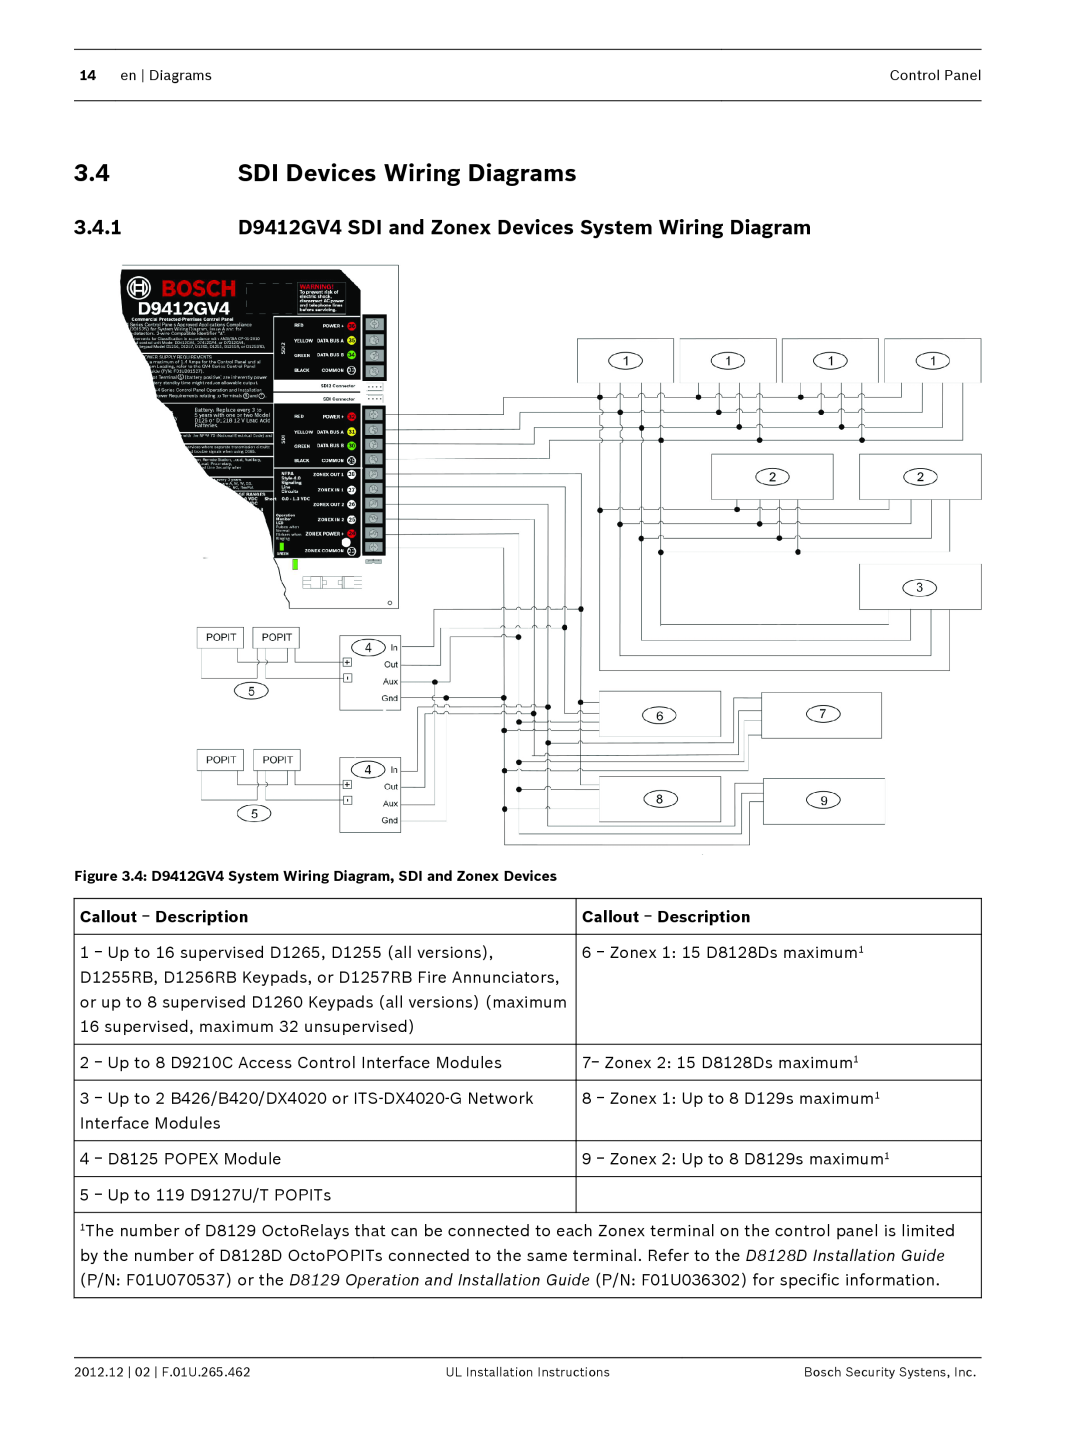 Bosch Appliances D9412GV4 installation instructions SDI Devices Wiring Diagrams, 3.4.1 